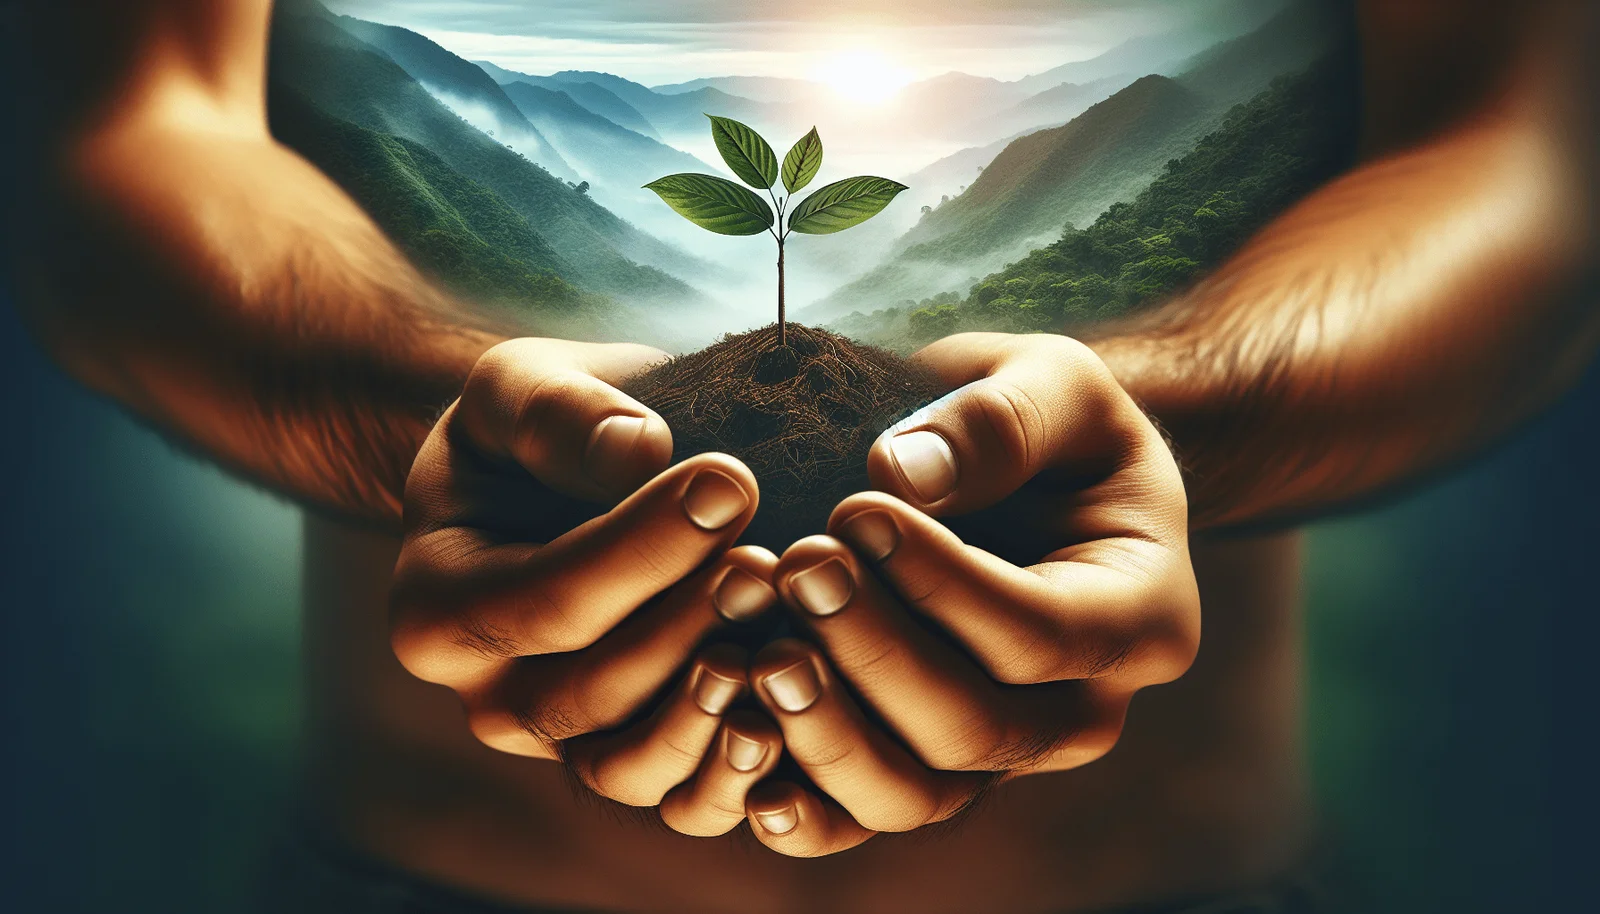 Growing in Faith While Caring for the Environment